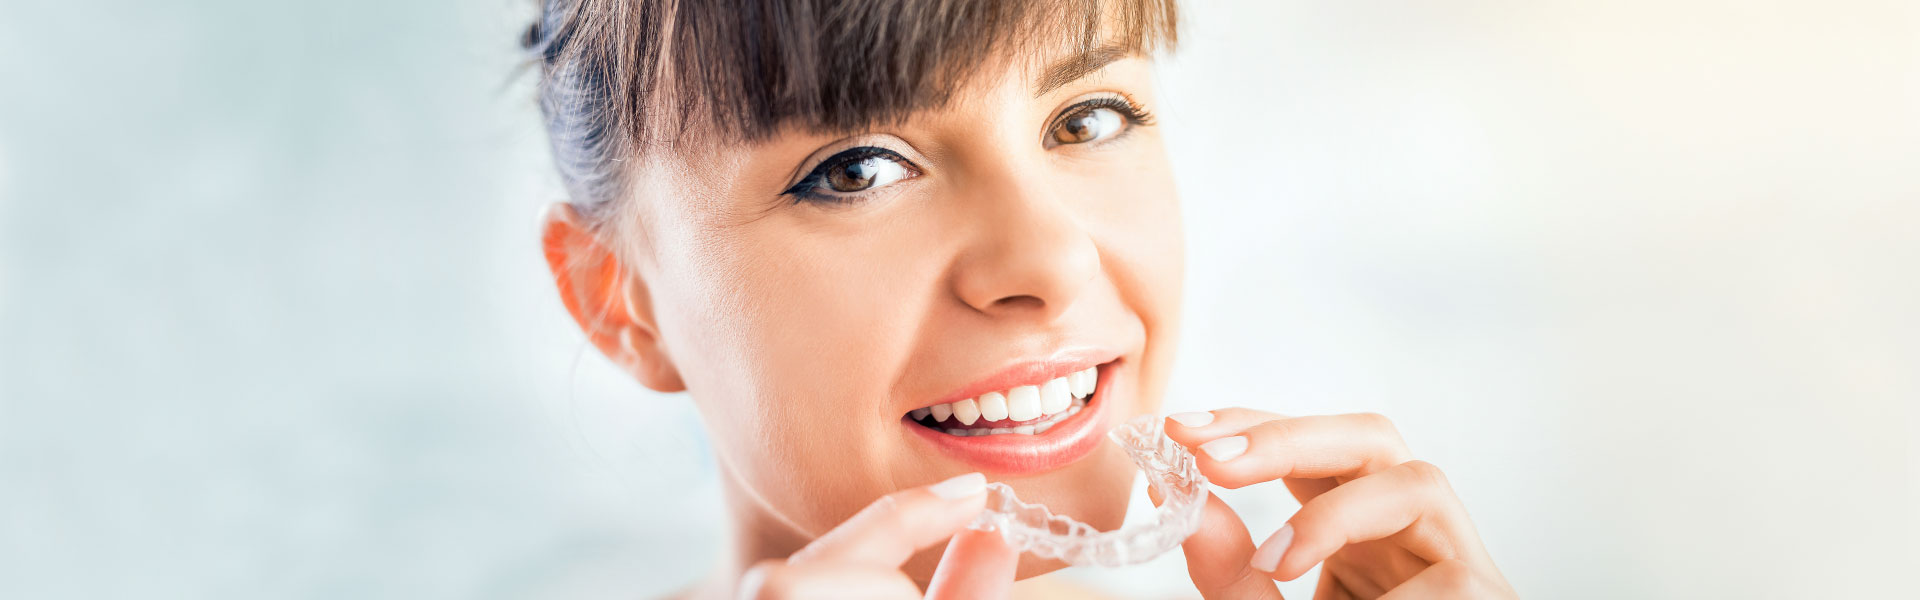 Top 3 Reasons You Want Invisalign Instead of Braces